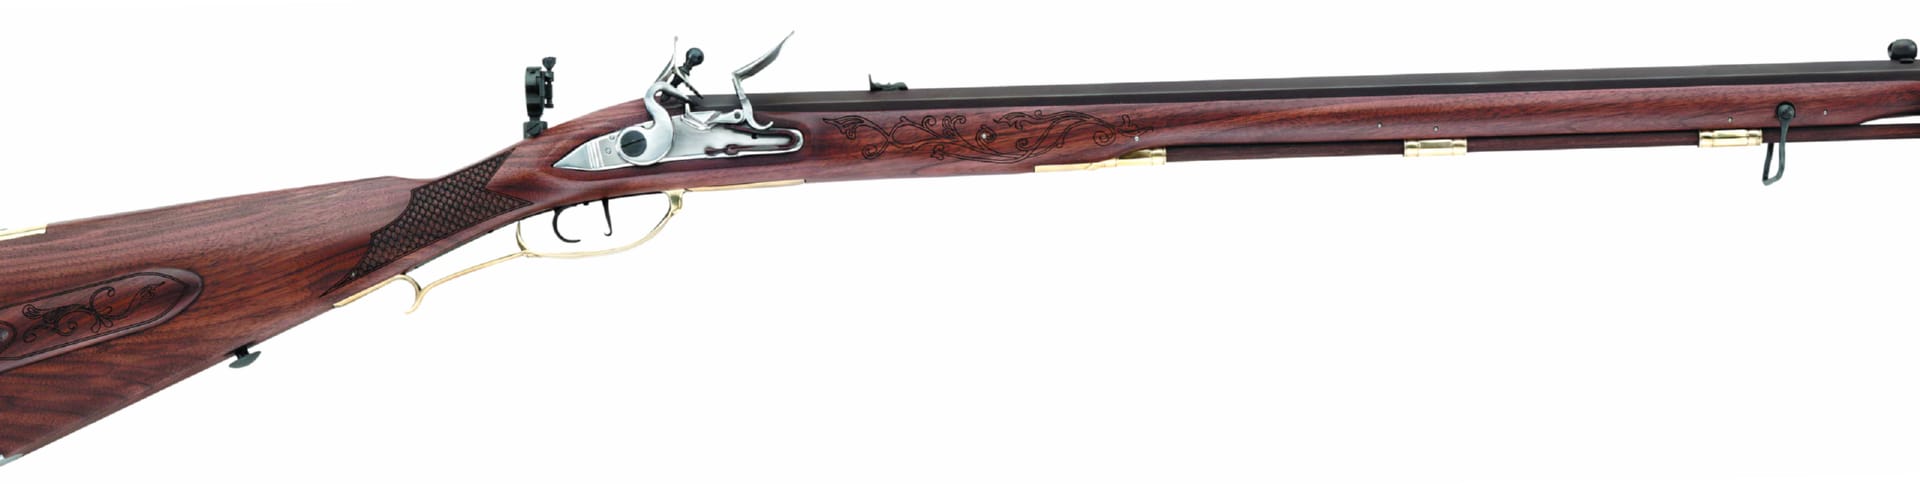 Harpers Ferry Model 1803 Rifle wallpapers HD quality